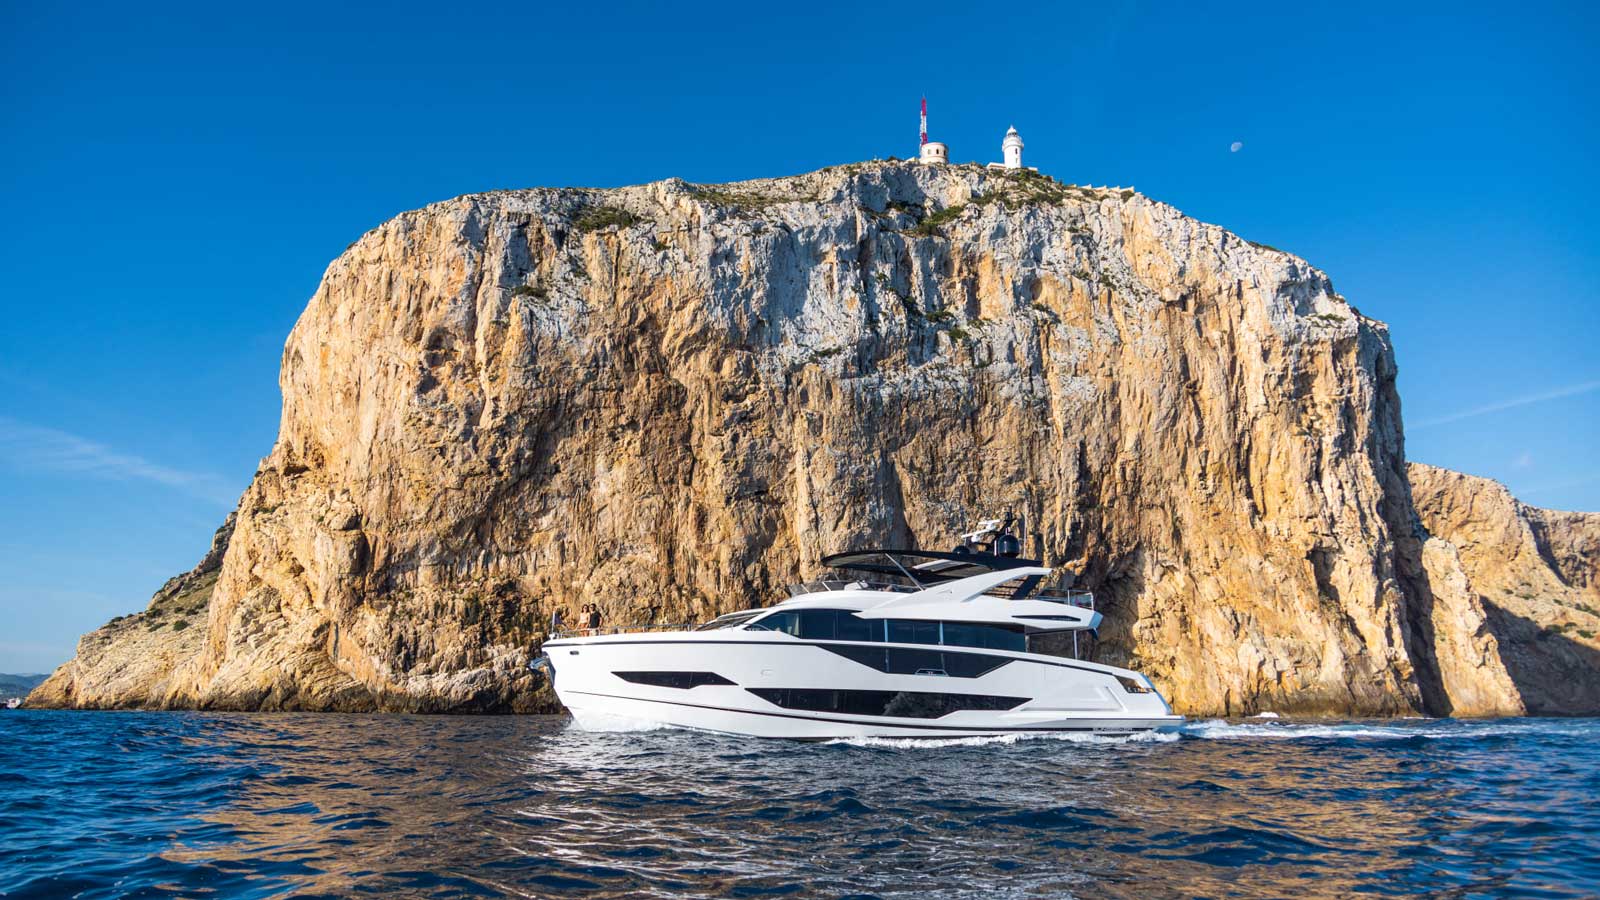 A guide to chartering a luxury yacht on Vis from Facebook